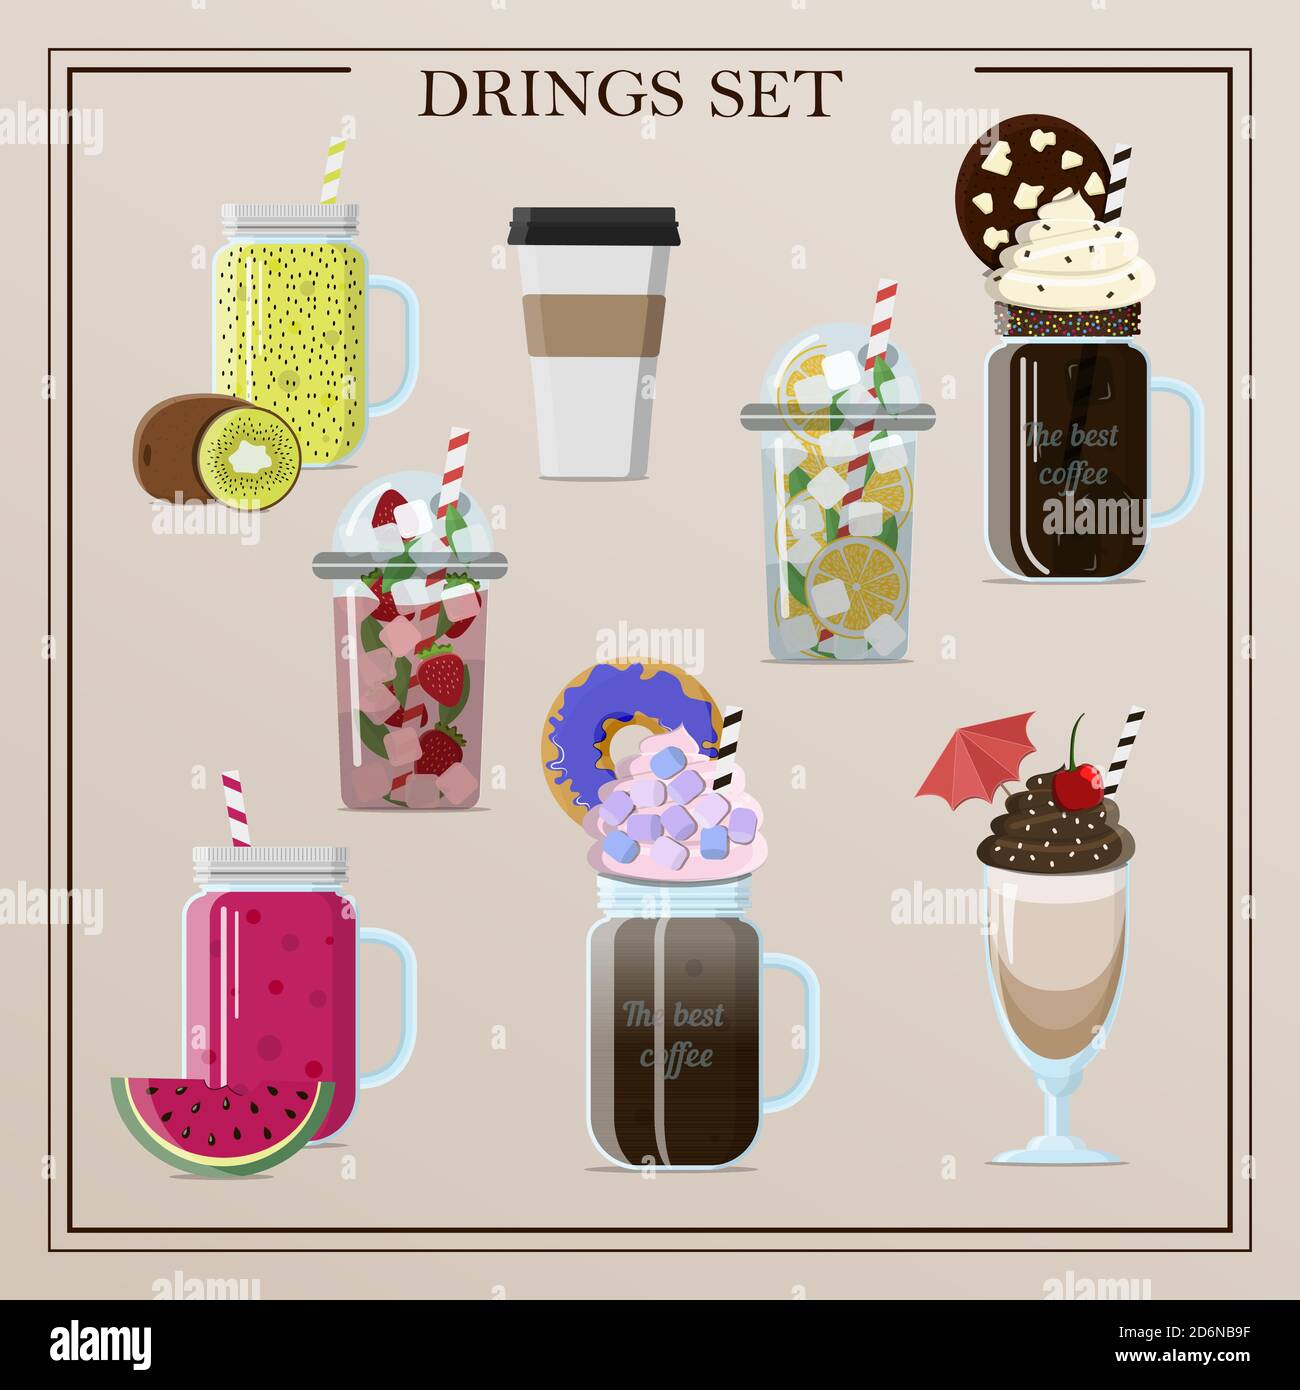 Set of different delicious vector drinks cocktails, coffee, smoothies, tea, milkshake, lemonade, ice coffee. Flat illustration of insulated glasses, glasses, mugs and plastic cups for cold and hot drinks. Drinks with cream, fruit, toppings, a straw and a cocktail umbrella for a summer party and relaxation. Stock Vector